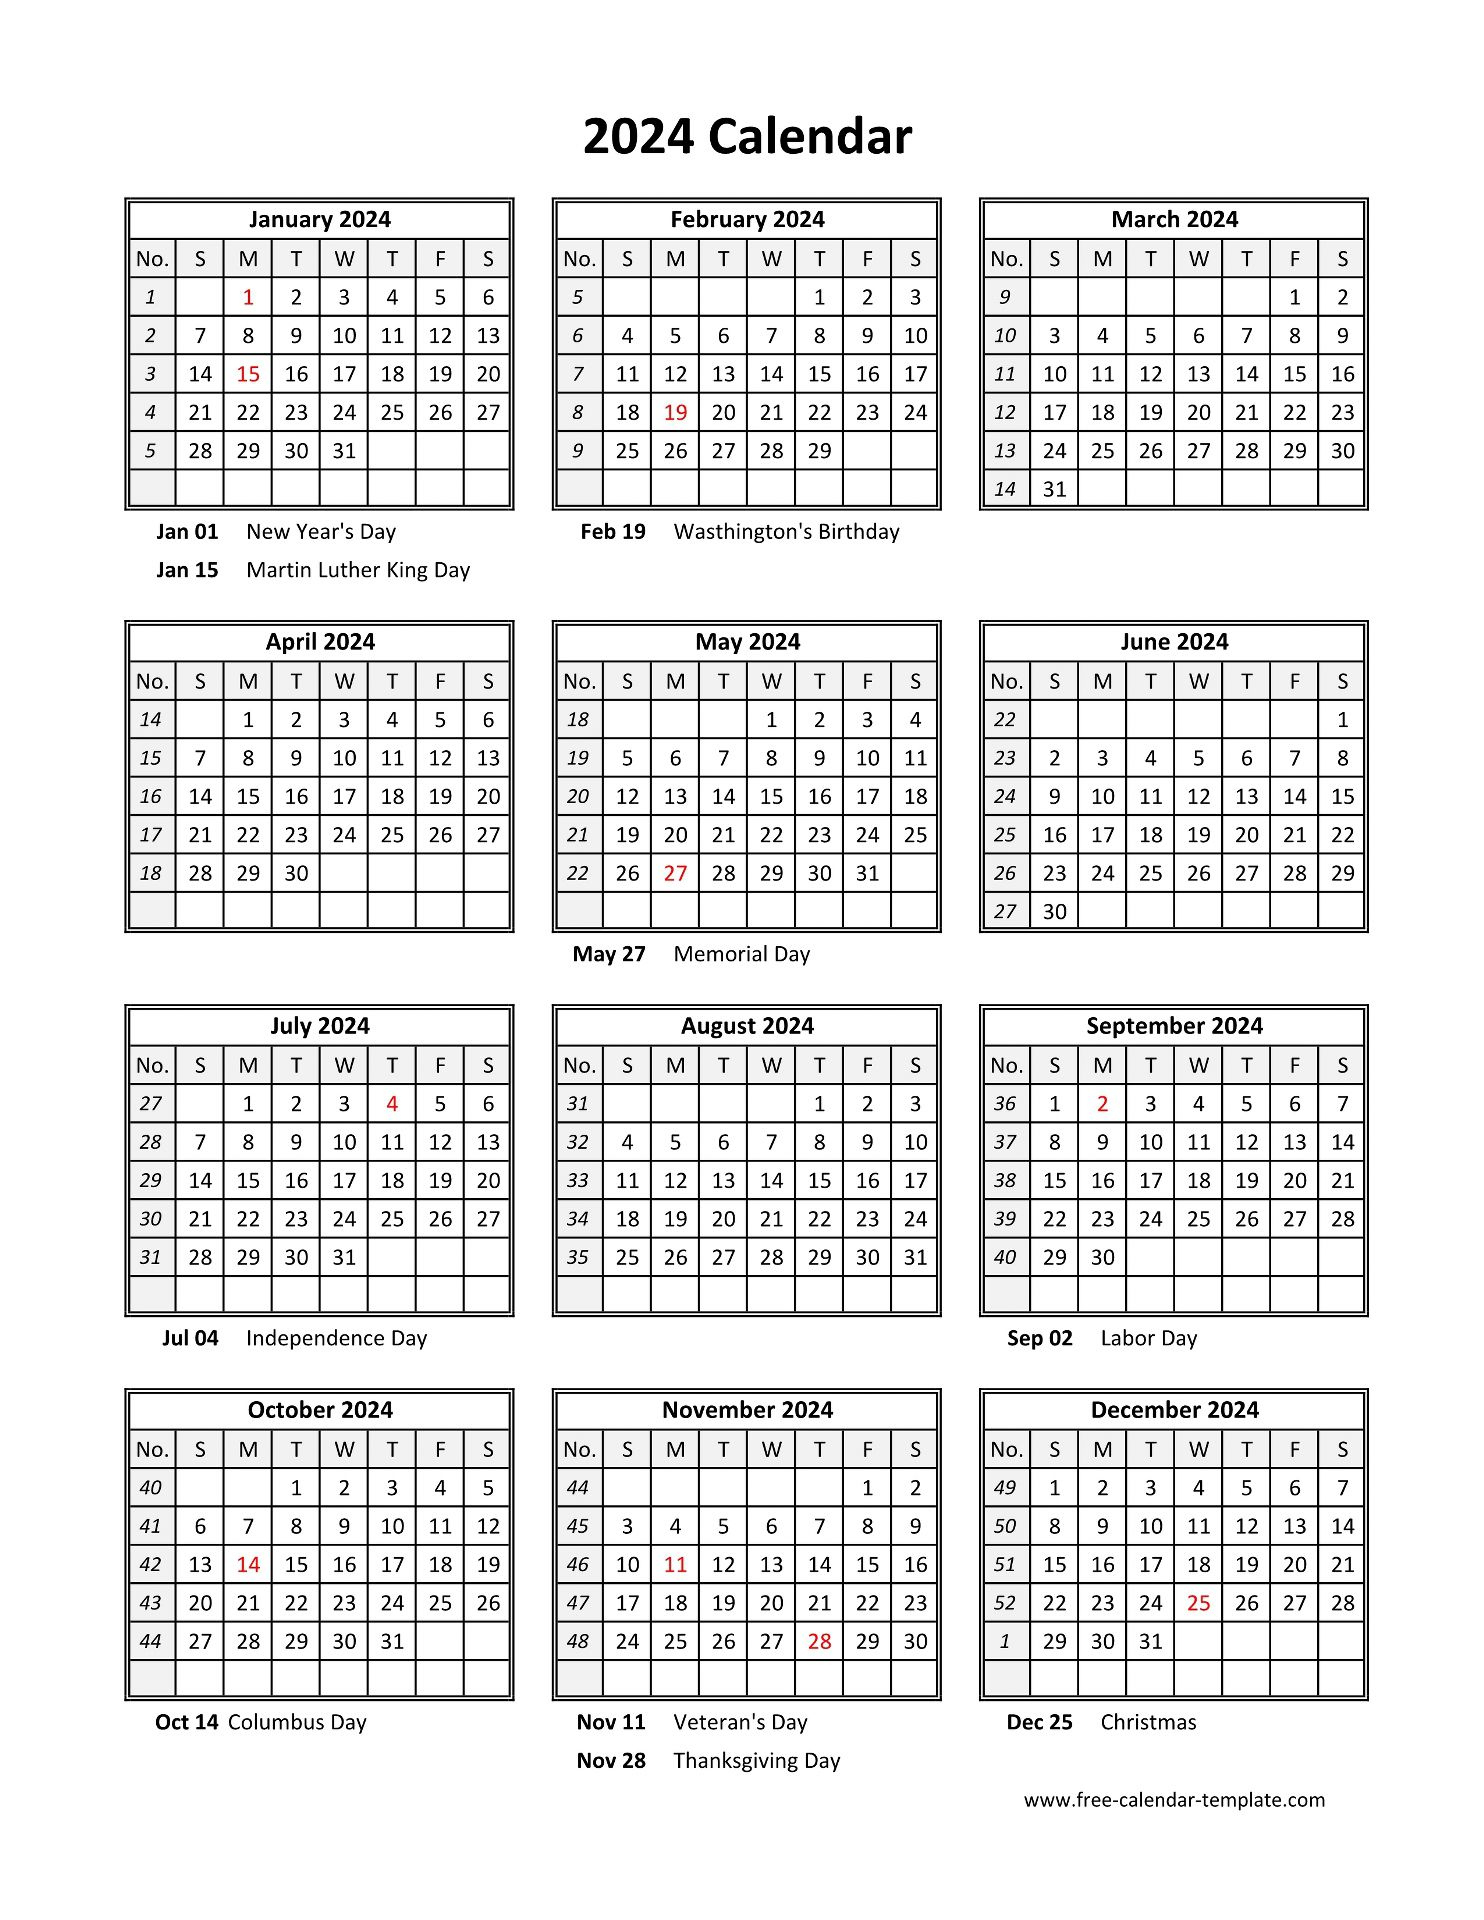 Yearly Printable Calendar 2024 With Holidays | Free-Calendar | 2024 Calendar Printable Free Pdf One Page